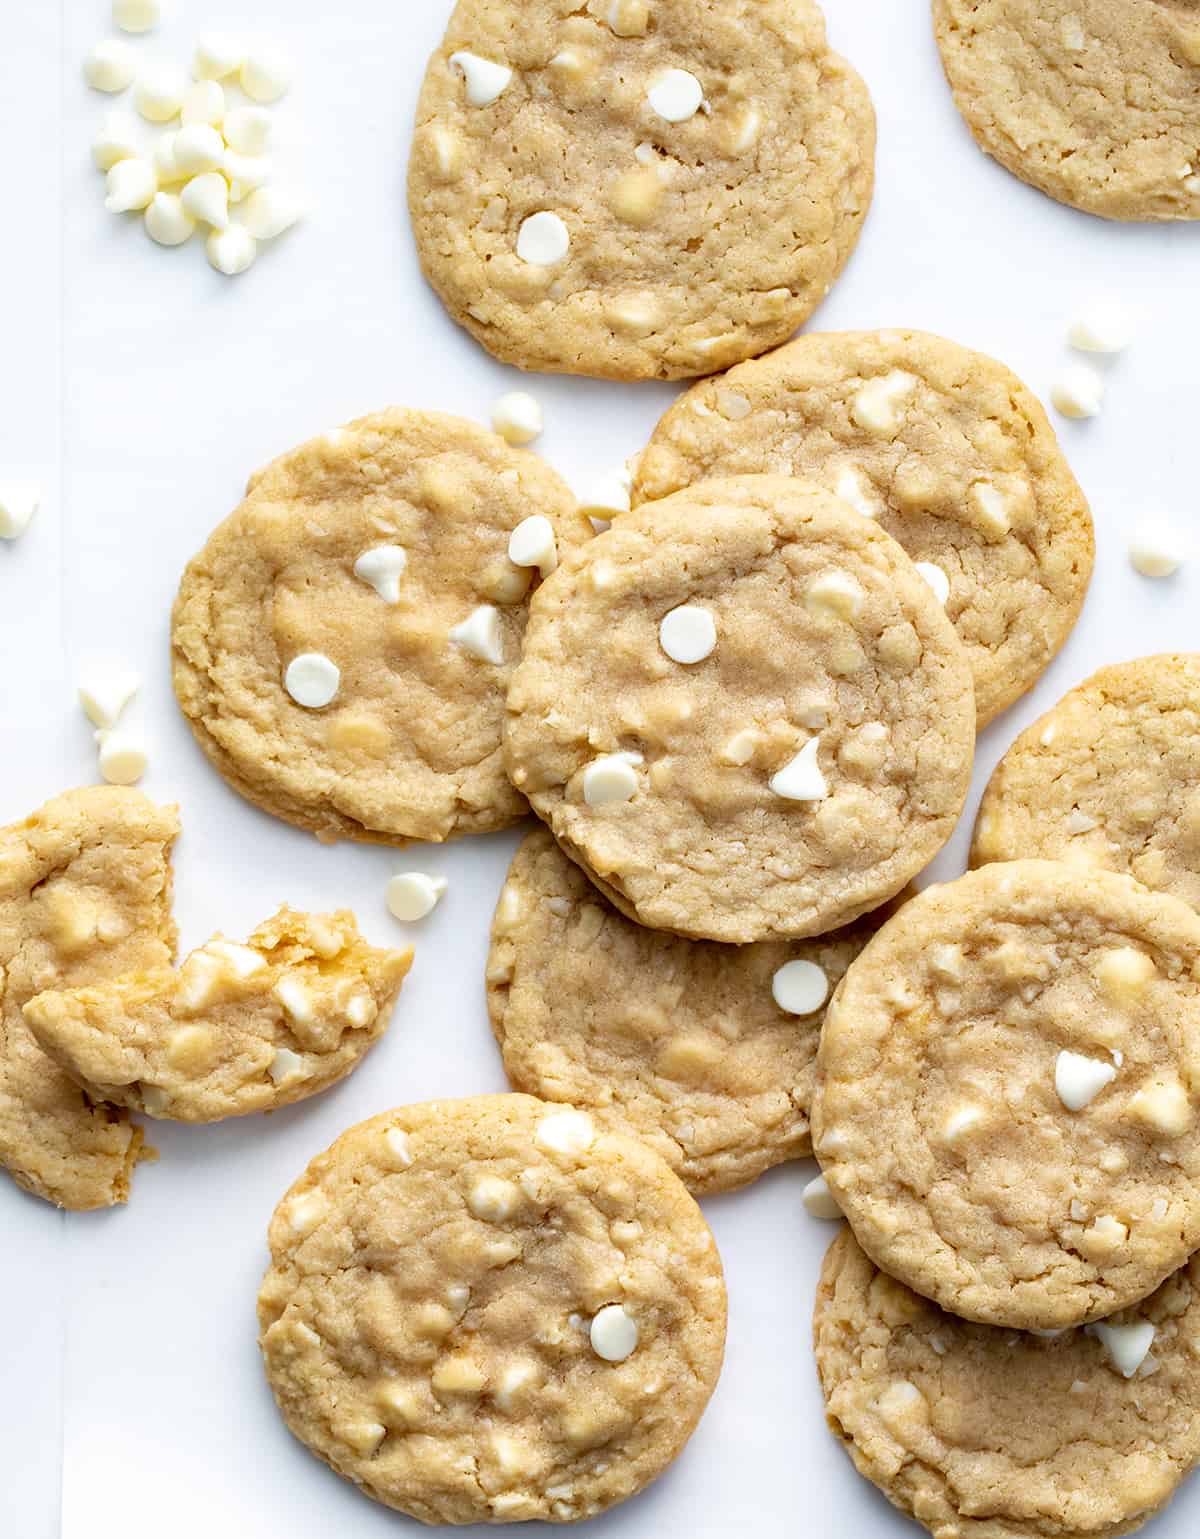 White Chocolate Macadamia Nut Cookies with White Chocolate Chips and a Broken in Half Cookie.